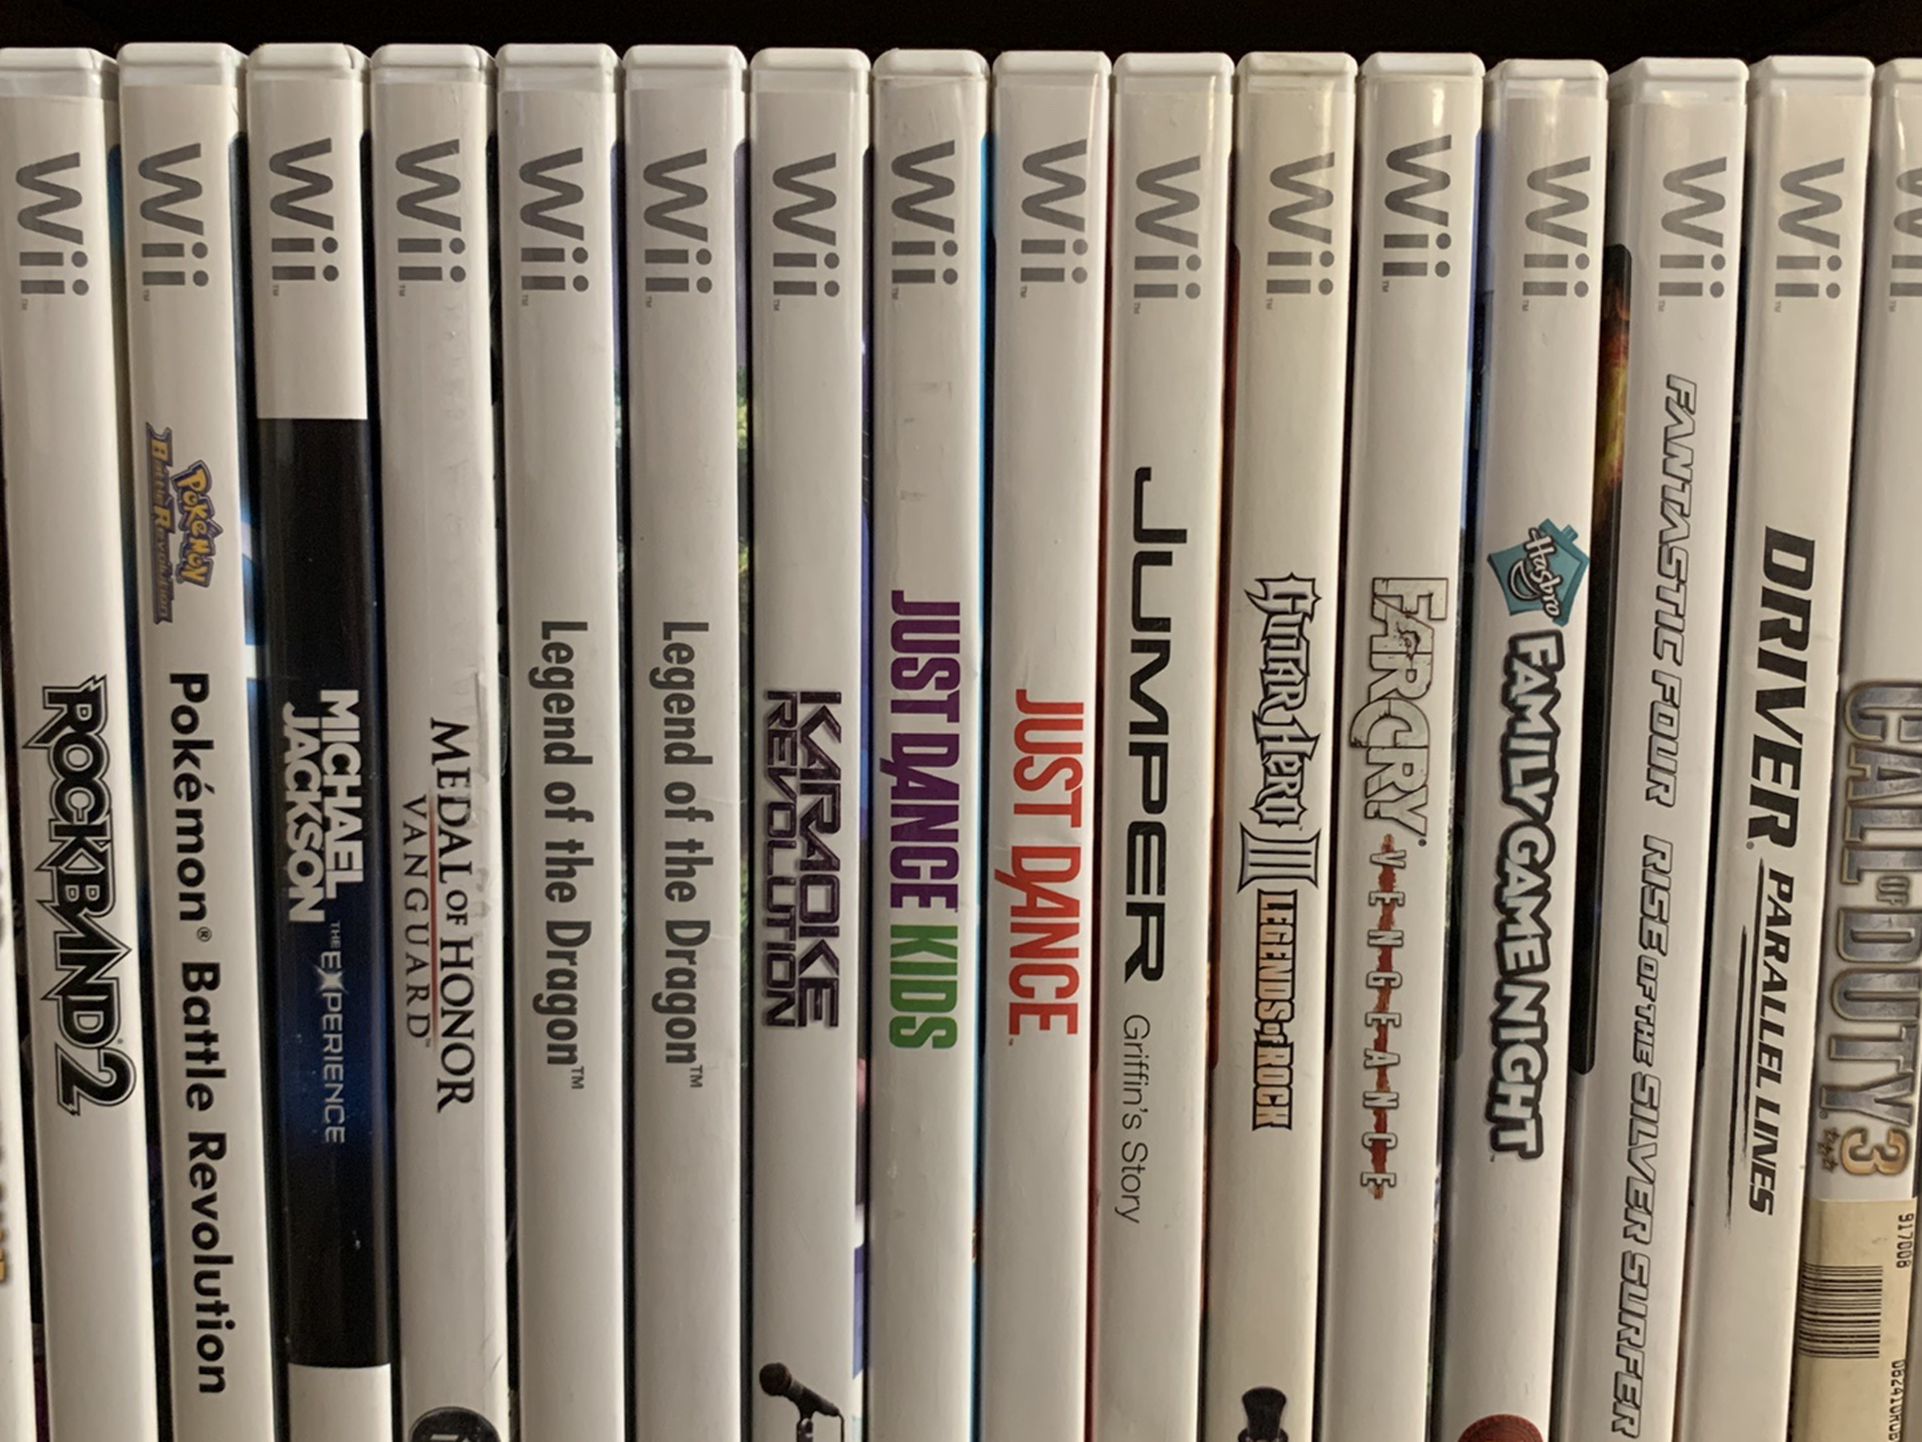 Nintendo Wii and Wii U Games & Accessories (Read Description for Prices)